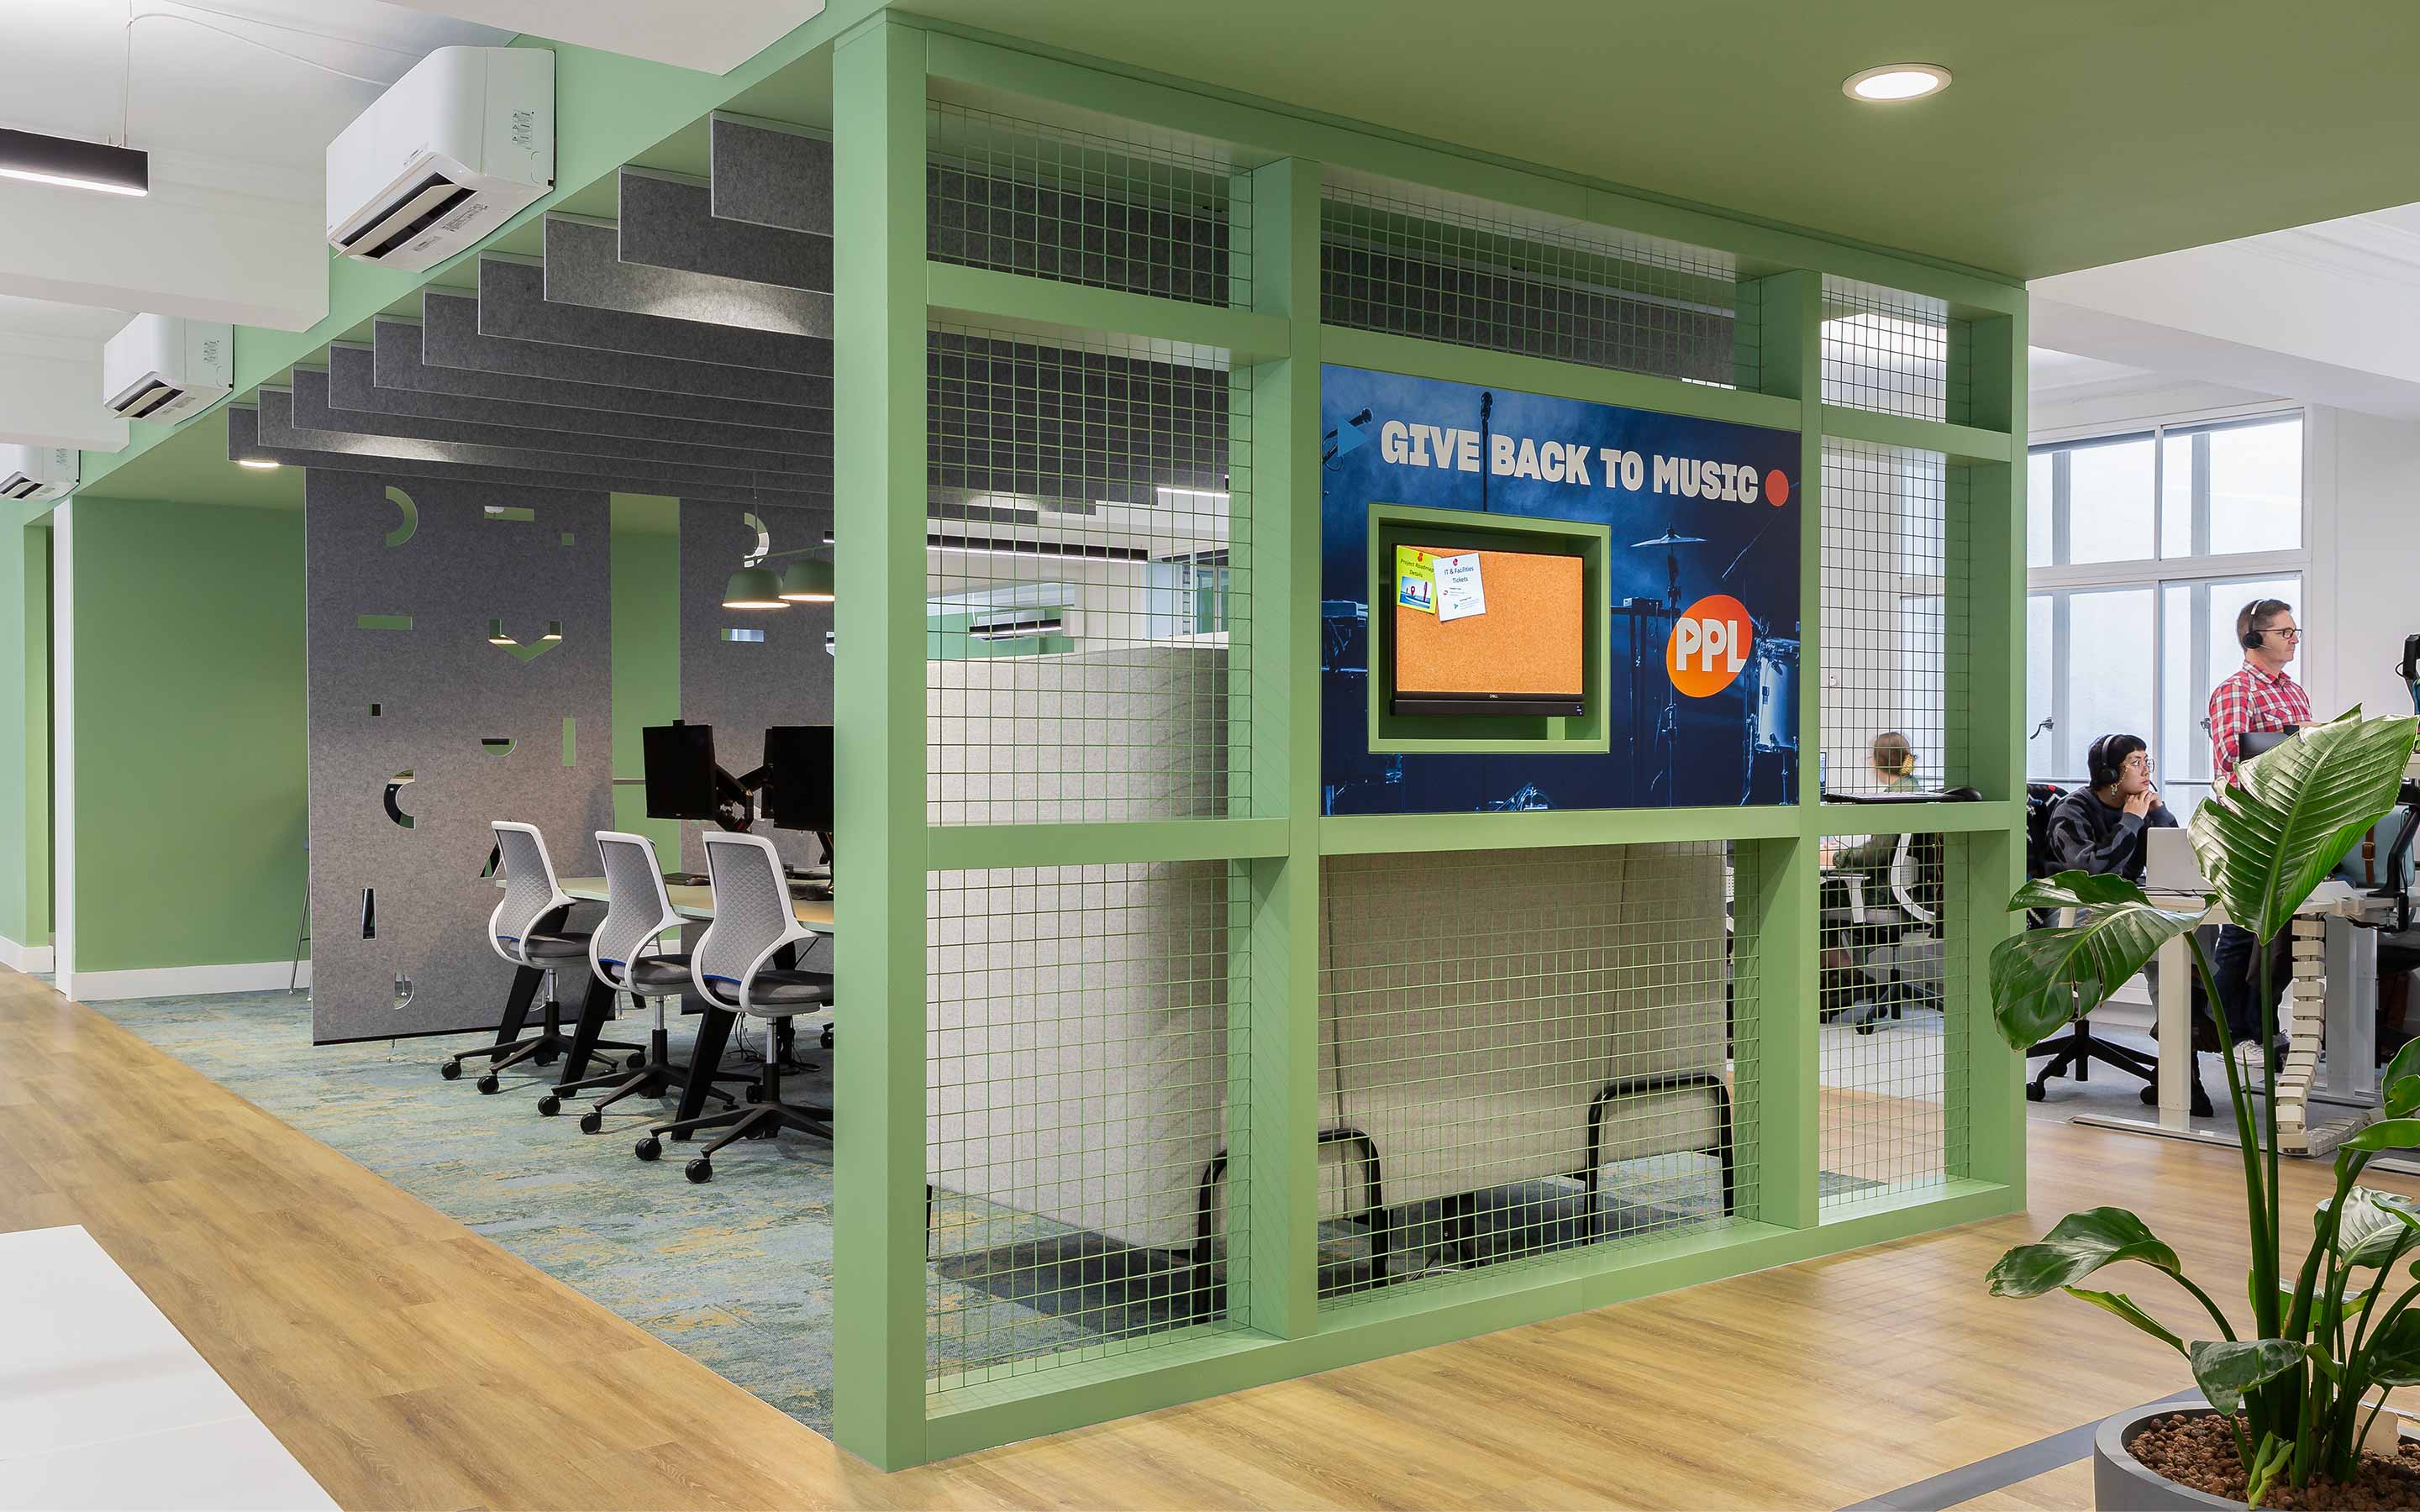 Creative office interior design featuring a collaboration area, musical motifs, pale green painted joinery, and people working in an open plan office